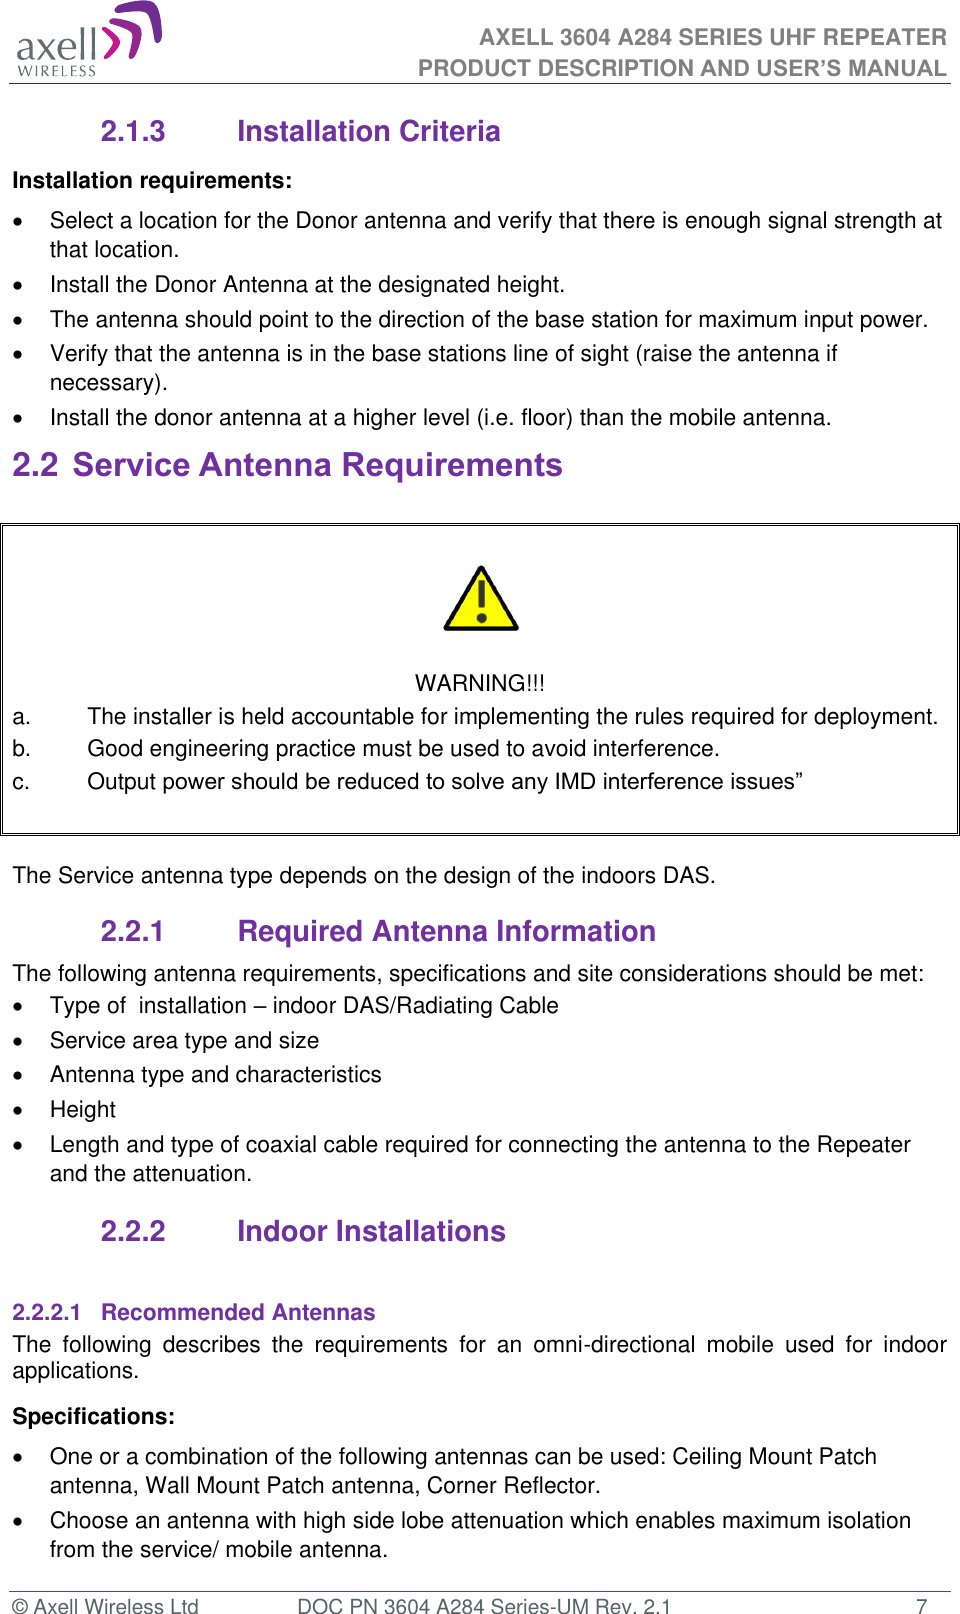 AXELL 3604 A284 SERIES UHF REPEATER PRODUCT DESCRIPTION AND USER’S MANUAL  © Axell Wireless Ltd  DOC PN 3604 A284 Series-UM Rev. 2.1  7 2.1.3  Installation Criteria Installation requirements:   Select a location for the Donor antenna and verify that there is enough signal strength at that location.   Install the Donor Antenna at the designated height.  The antenna should point to the direction of the base station for maximum input power.   Verify that the antenna is in the base stations line of sight (raise the antenna if necessary).    Install the donor antenna at a higher level (i.e. floor) than the mobile antenna. 2.2 Service Antenna Requirements     WARNING!!! a.  The installer is held accountable for implementing the rules required for deployment. b.  Good engineering practice must be used to avoid interference. c.  Output    The Service antenna type depends on the design of the indoors DAS.  2.2.1  Required Antenna Information The following antenna requirements, specifications and site considerations should be met:   Type of  installation  indoor DAS/Radiating Cable   Service area type and size    Antenna type and characteristics   Height  Length and type of coaxial cable required for connecting the antenna to the Repeater and the attenuation. 2.2.2  Indoor Installations  2.2.2.1  Recommended Antennas The  following  describes  the  requirements  for  an  omni-directional  mobile  used  for  indoor applications. Specifications:   One or a combination of the following antennas can be used: Ceiling Mount Patch antenna, Wall Mount Patch antenna, Corner Reflector.   Choose an antenna with high side lobe attenuation which enables maximum isolation from the service/ mobile antenna. 